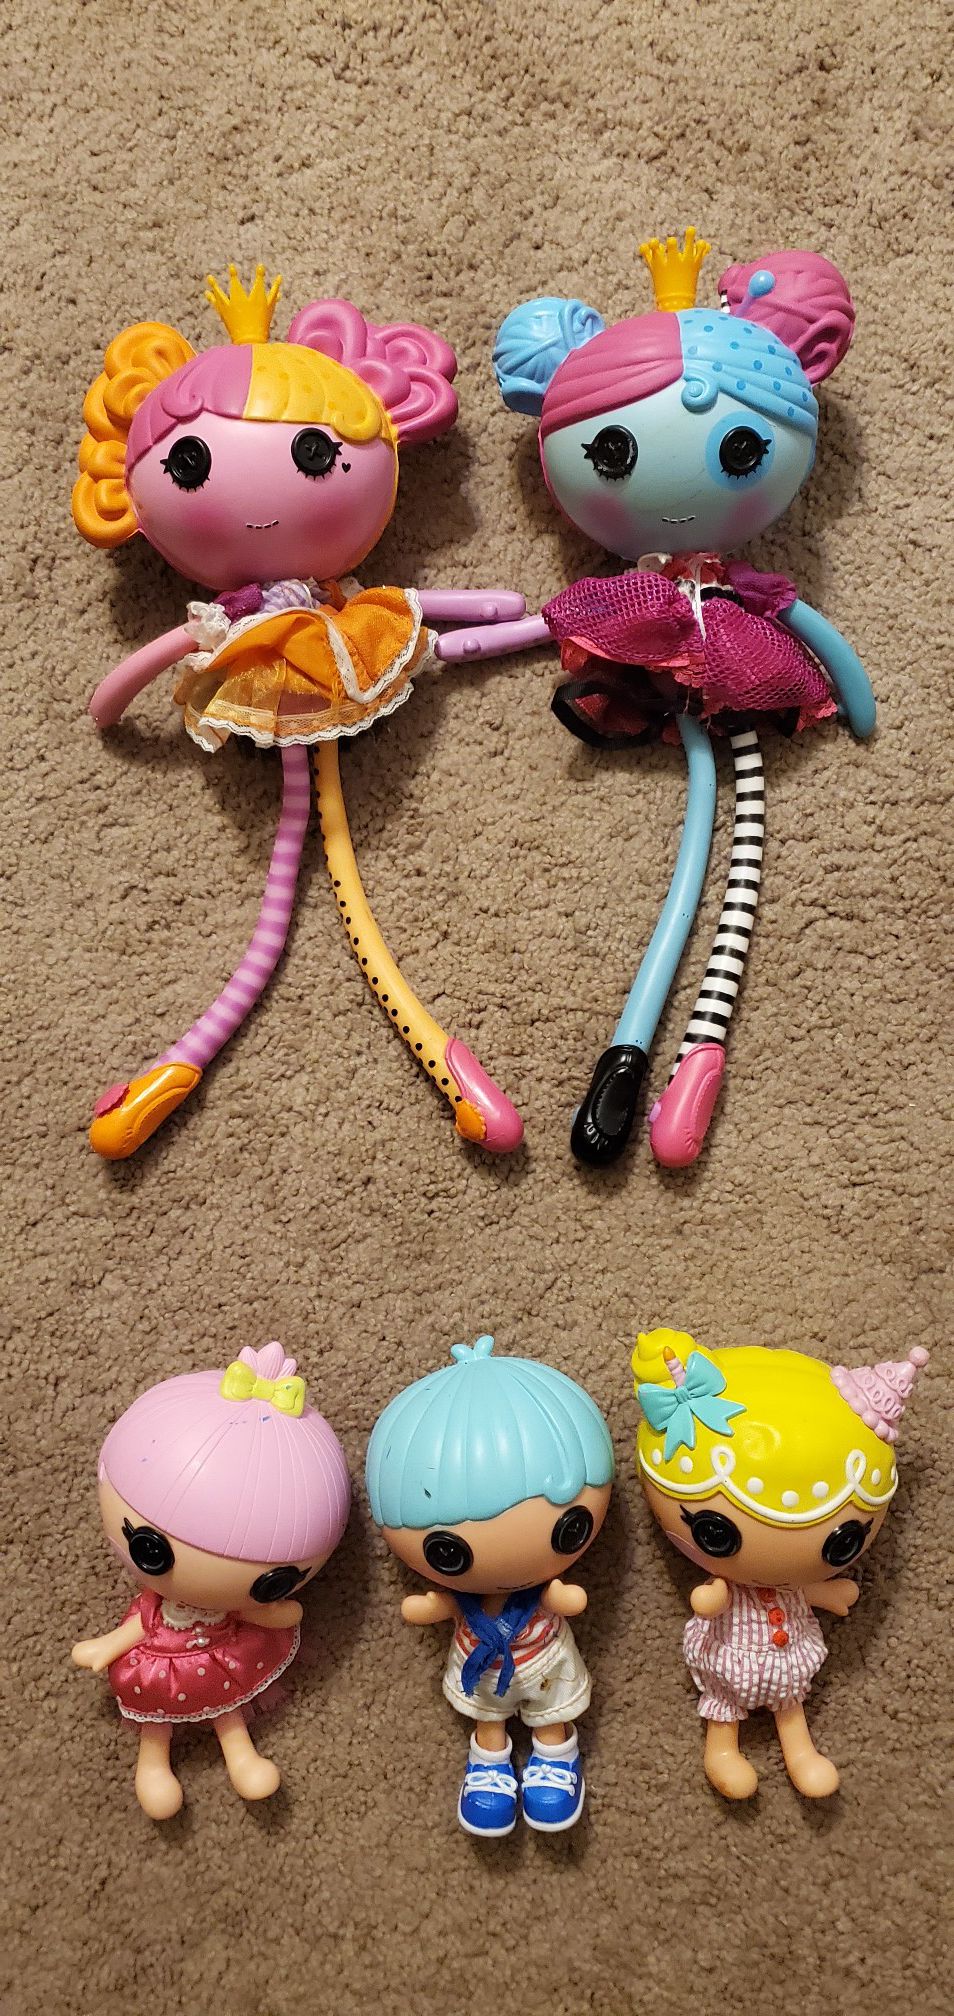 LALALOOPSY DOLL TOYS ALL FOR $15 FIRM